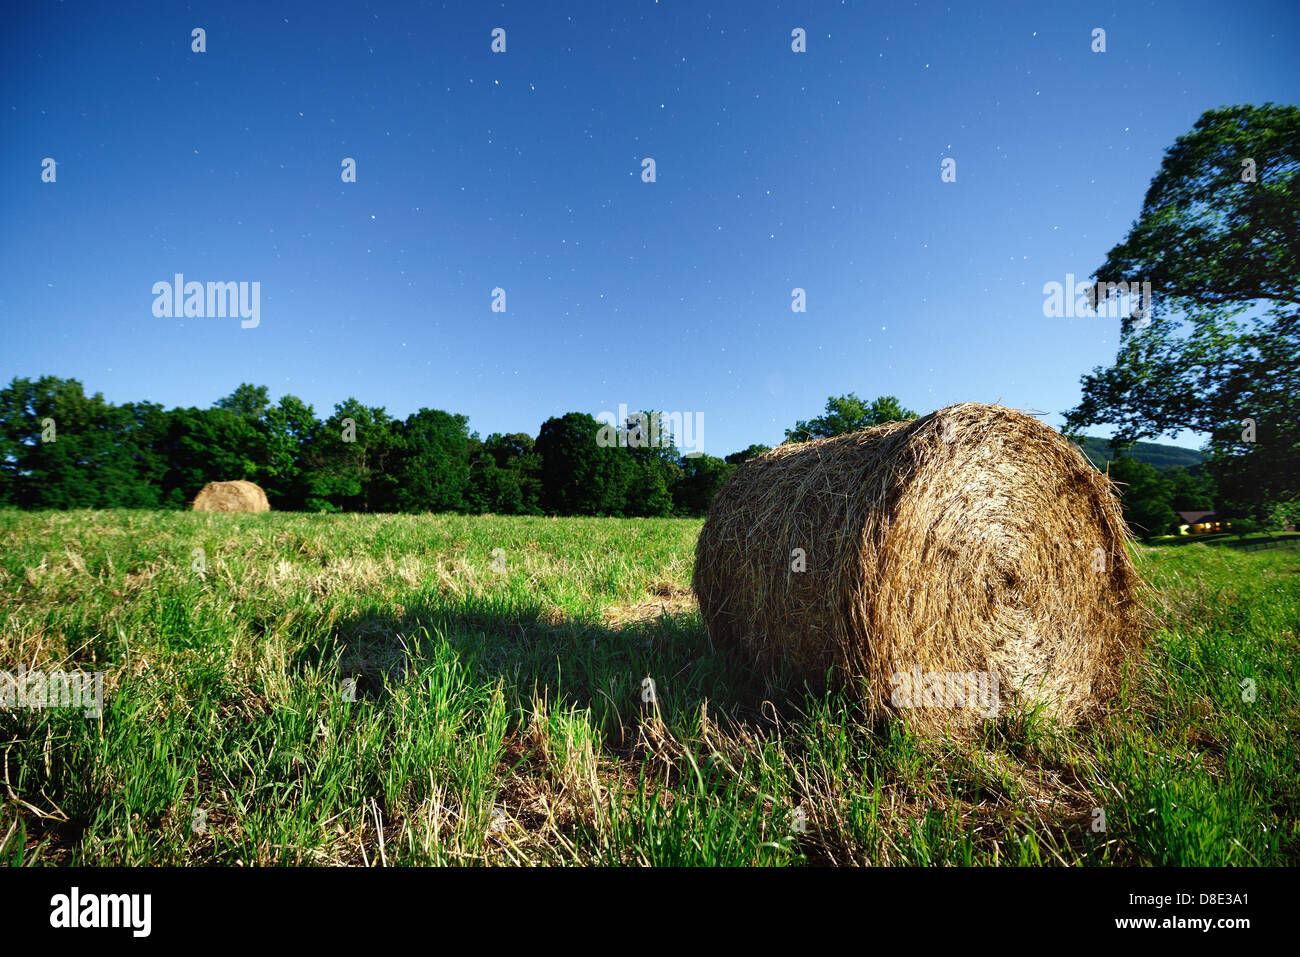 Hay bale in the moonlight Stock Photo